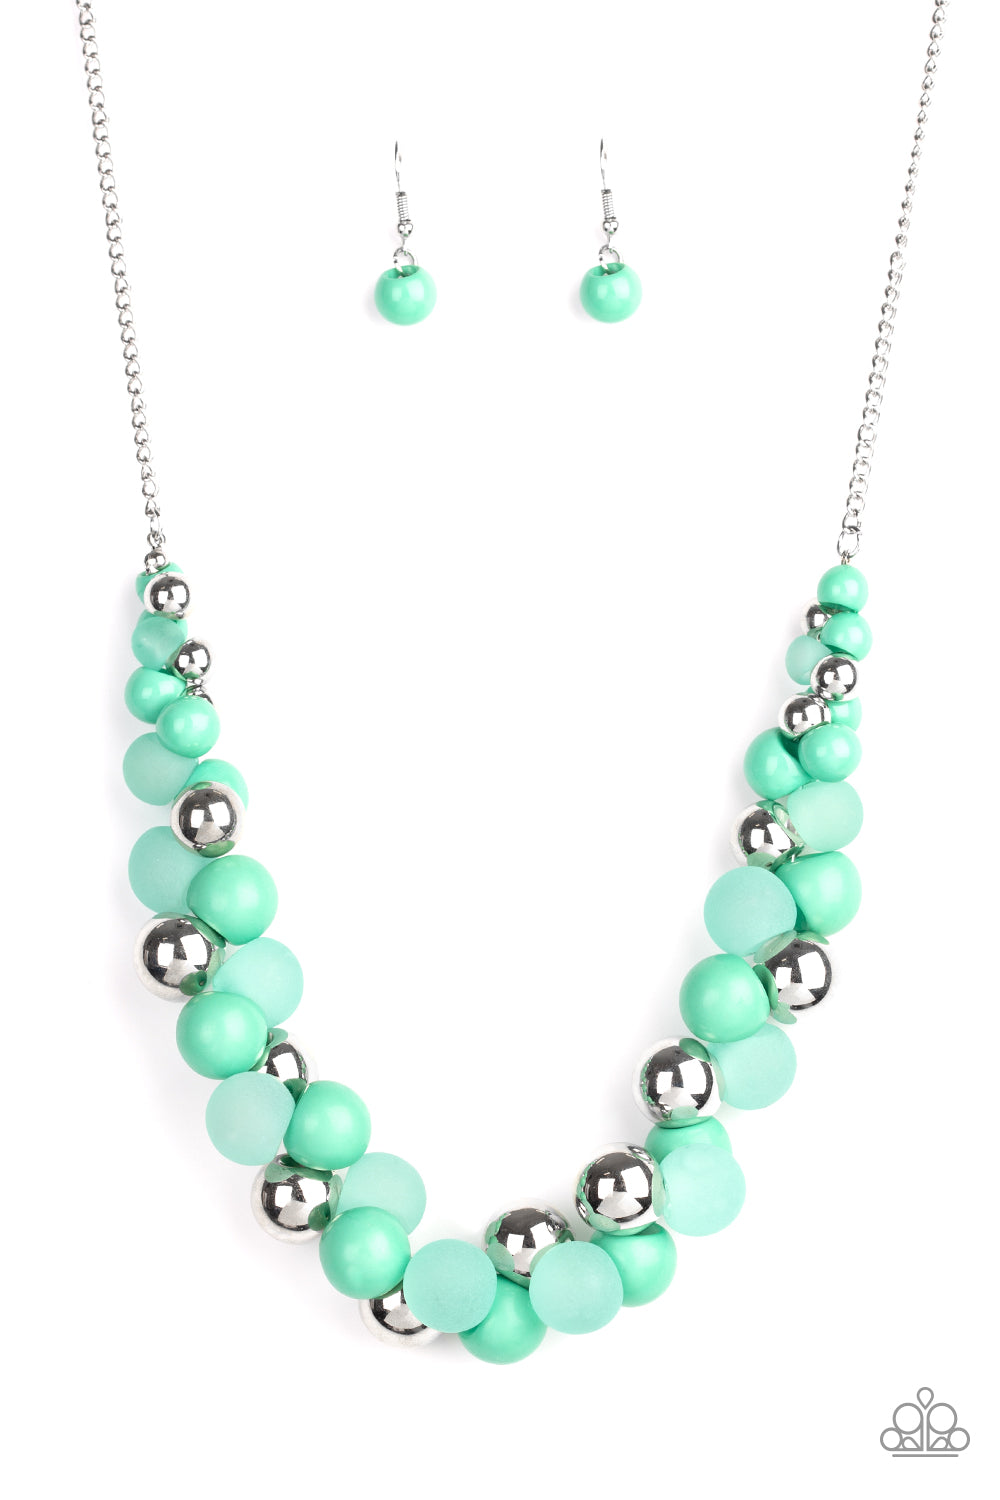 Bubbly Brilliance - Green Item #N766 A bubbly collection of imperfect silver, opaque, and Biscay Green beads are threaded along an invisible wire below the collar, creating a colorful cluster. Features an adjustable clasp closure. All Paparazzi Accessories are lead free and nickel free!  Sold as one individual necklace. Includes one pair of matching earrings.